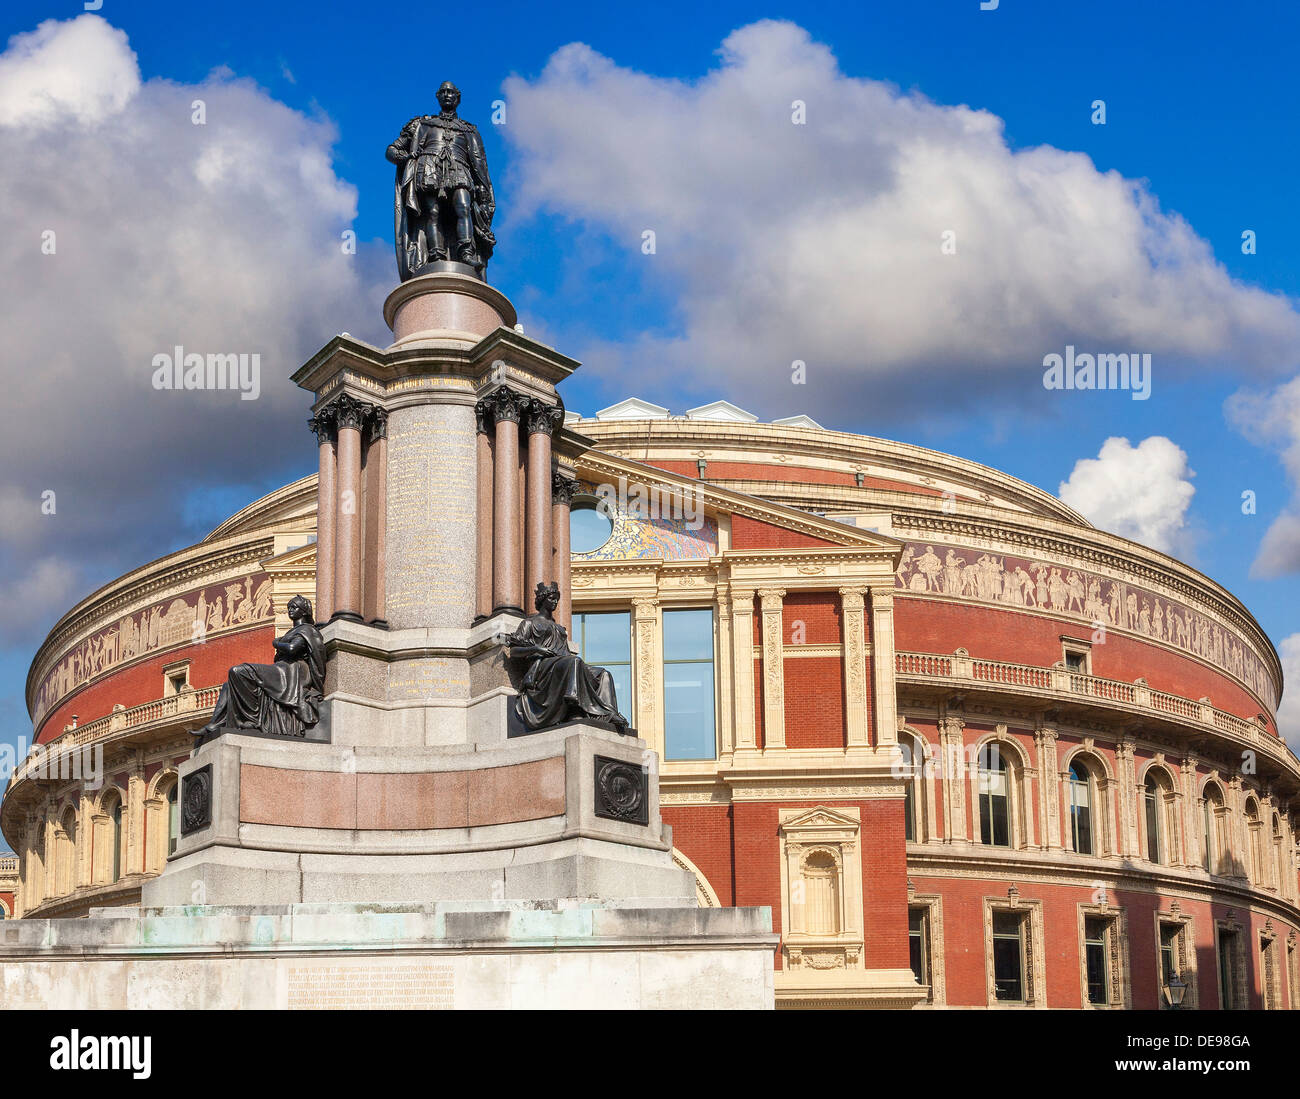 The Royal Albert Hall, London, UK, rear view from Prince Consort Road, towering statue of Prince Albert in foreground Stock Photo